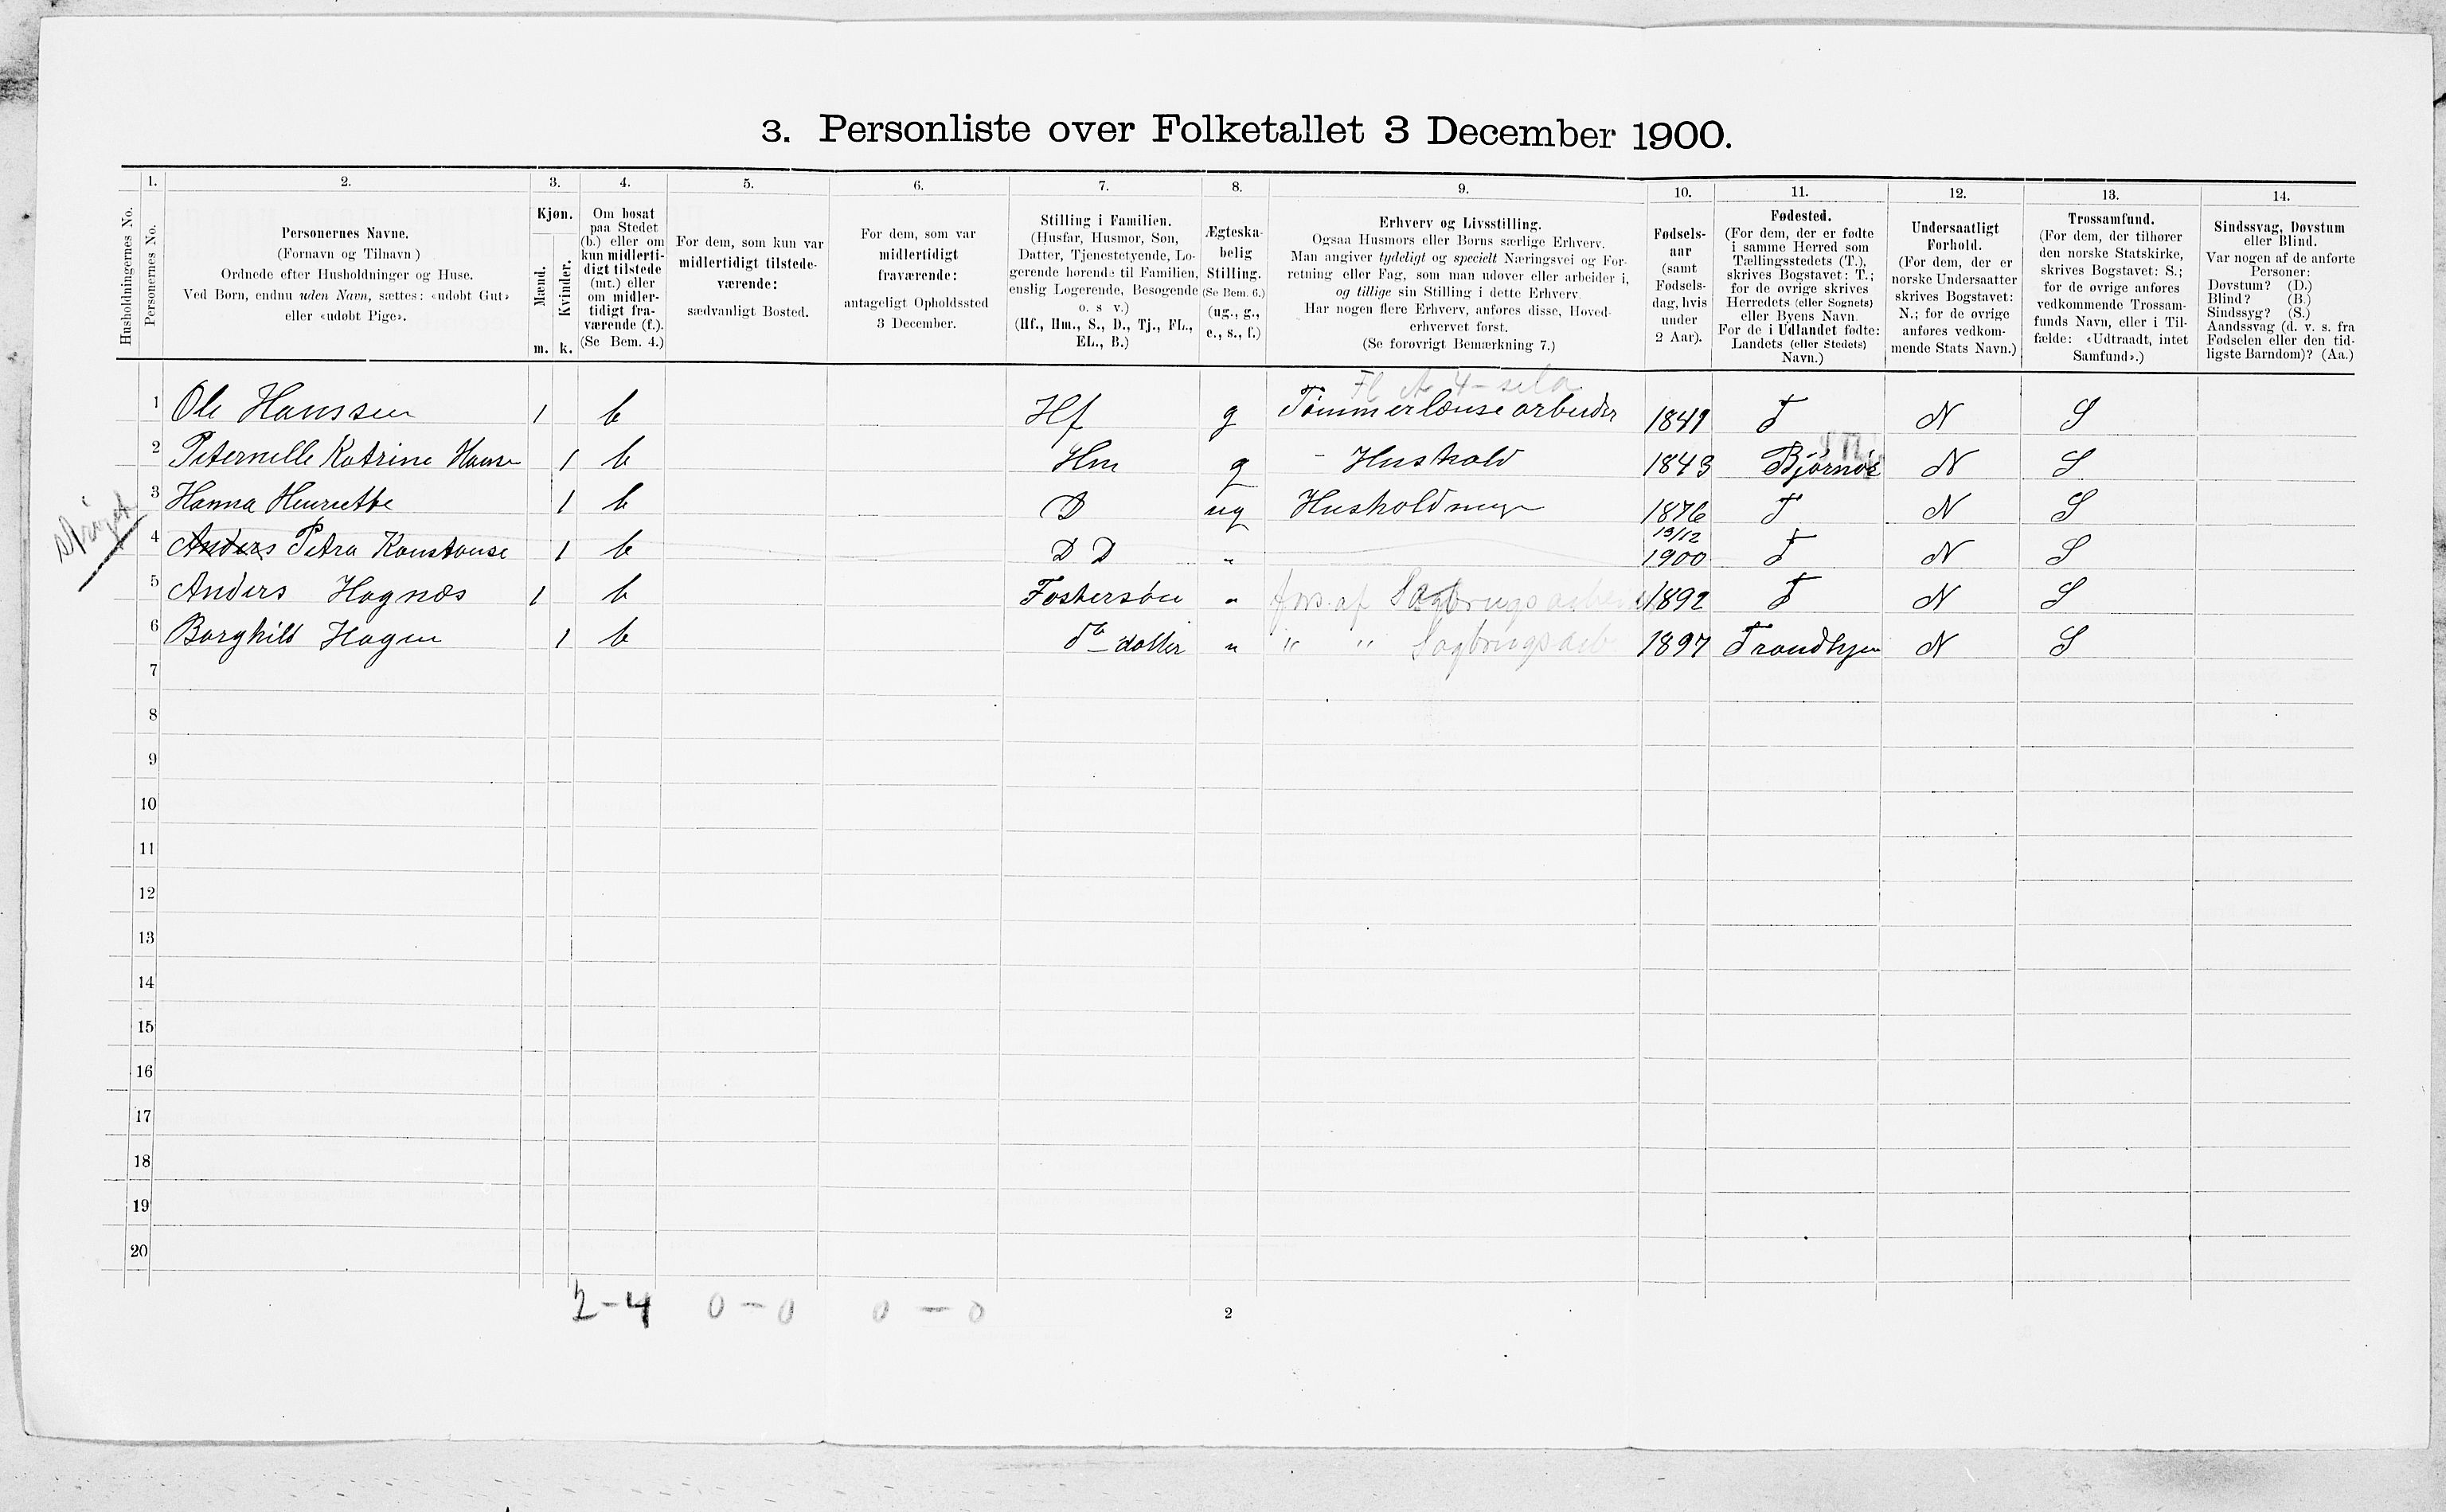 SAT, 1900 census for Orkdal, 1900, p. 207